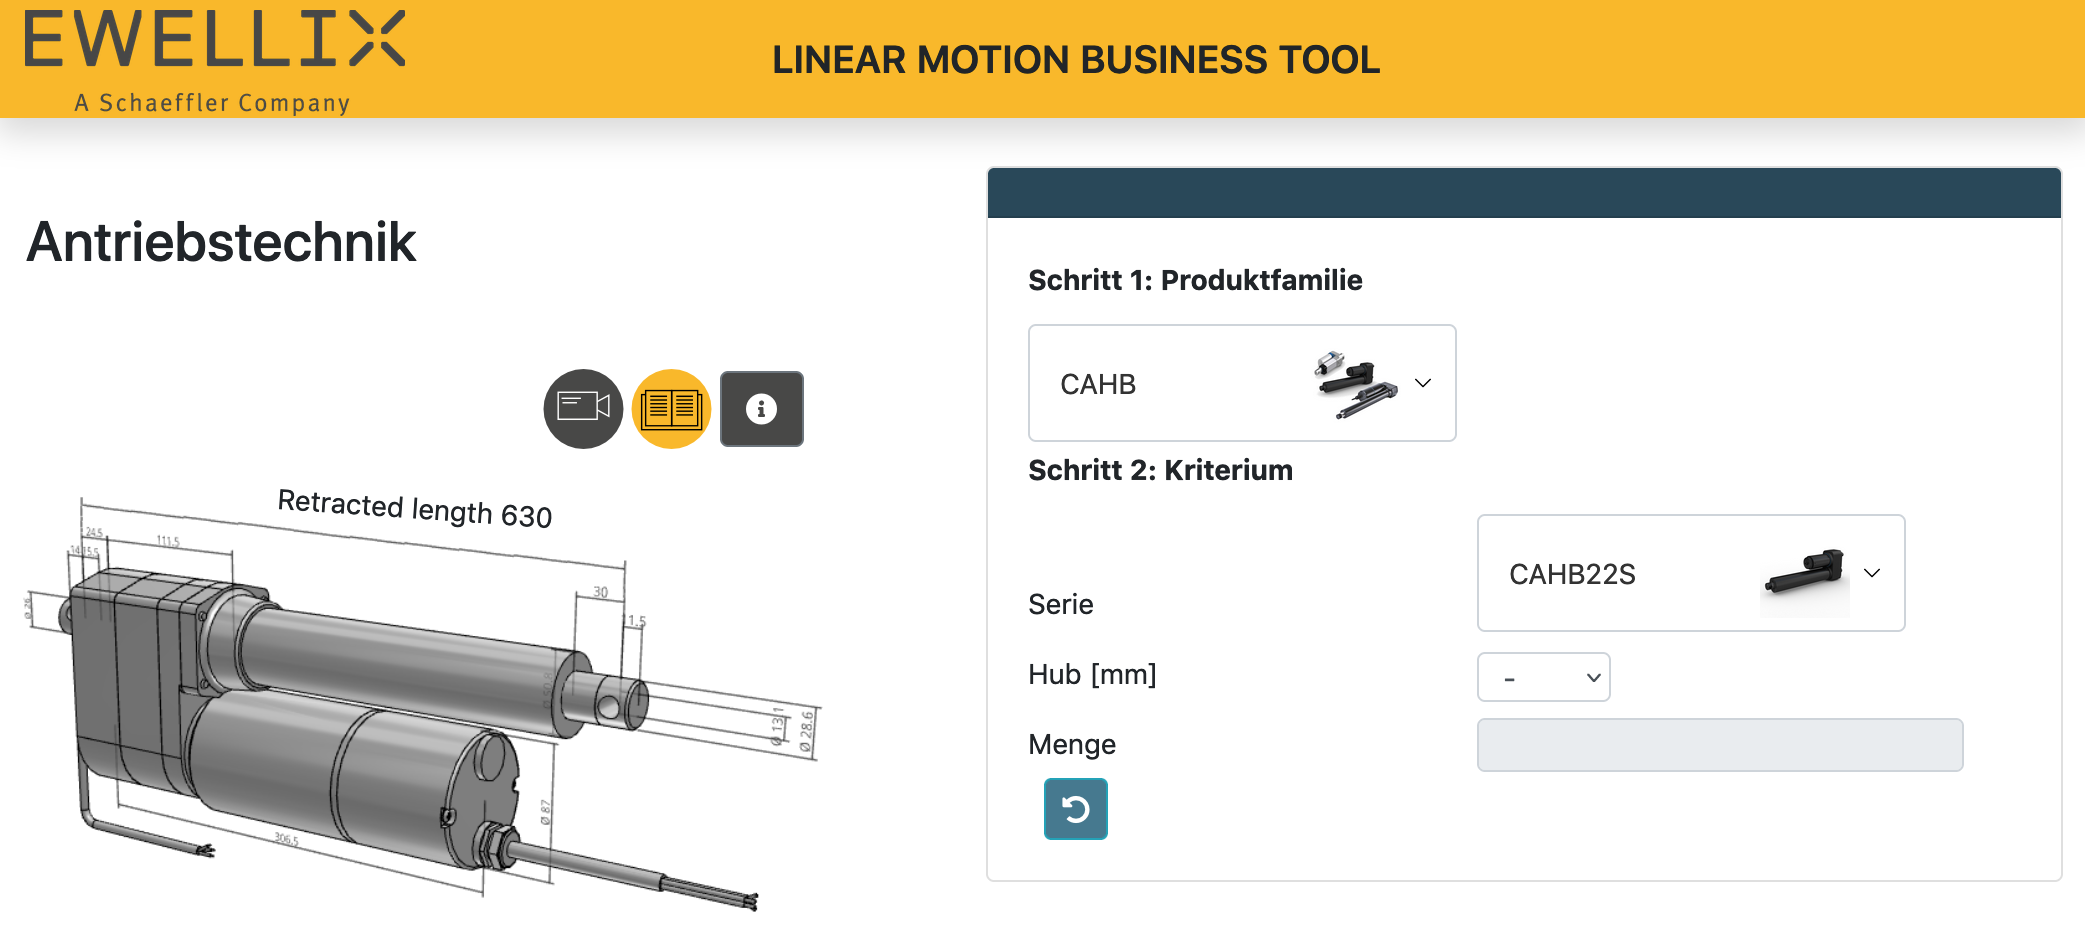 Ewellix LINEAR MOTION BUSINESS TOOL